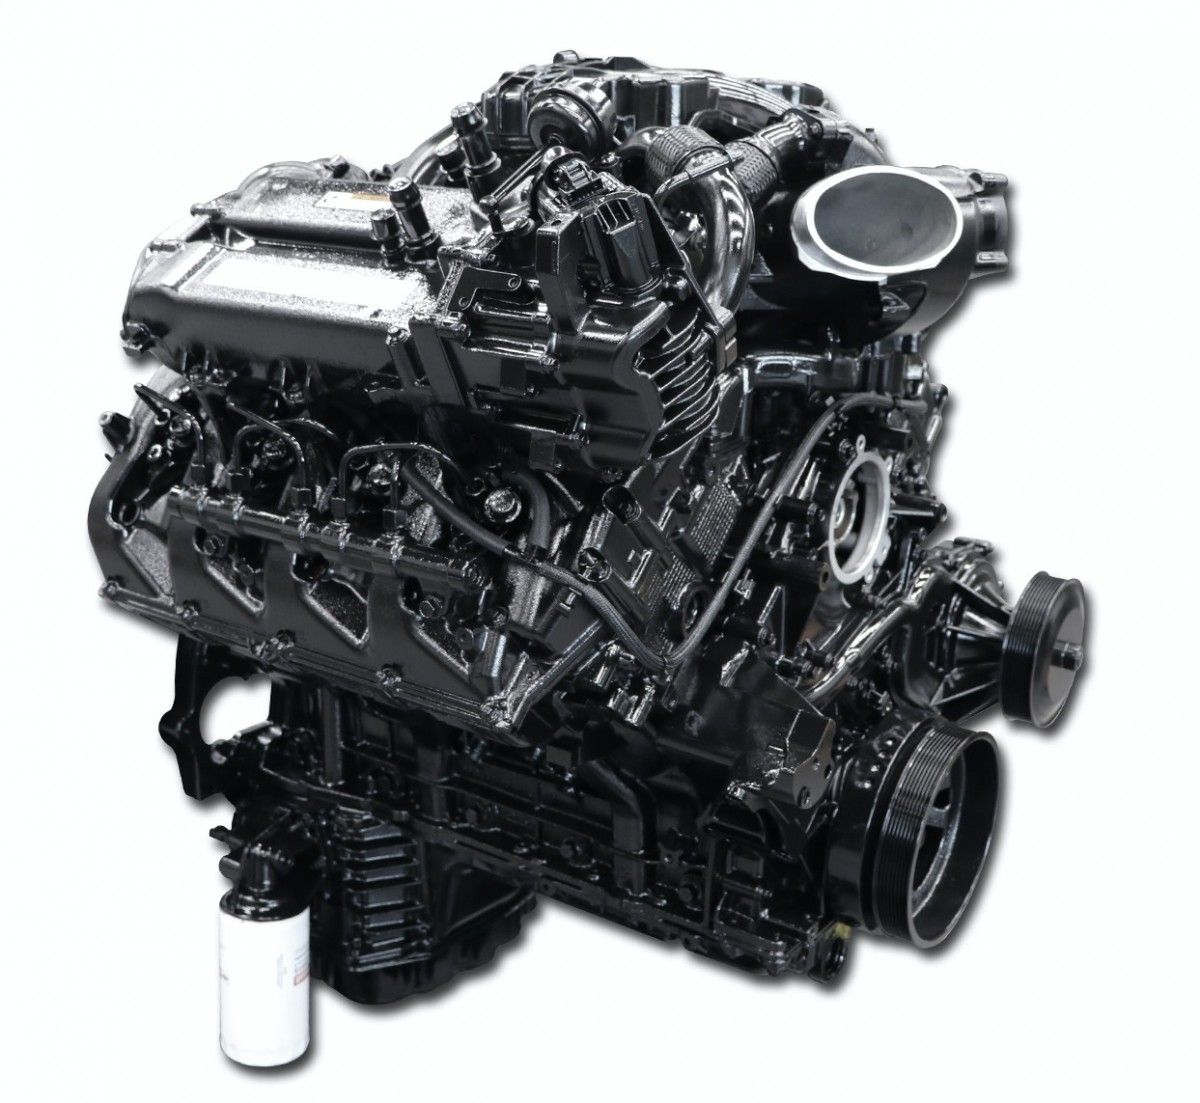 Own a Ford Truck? New Engine Options Available for You